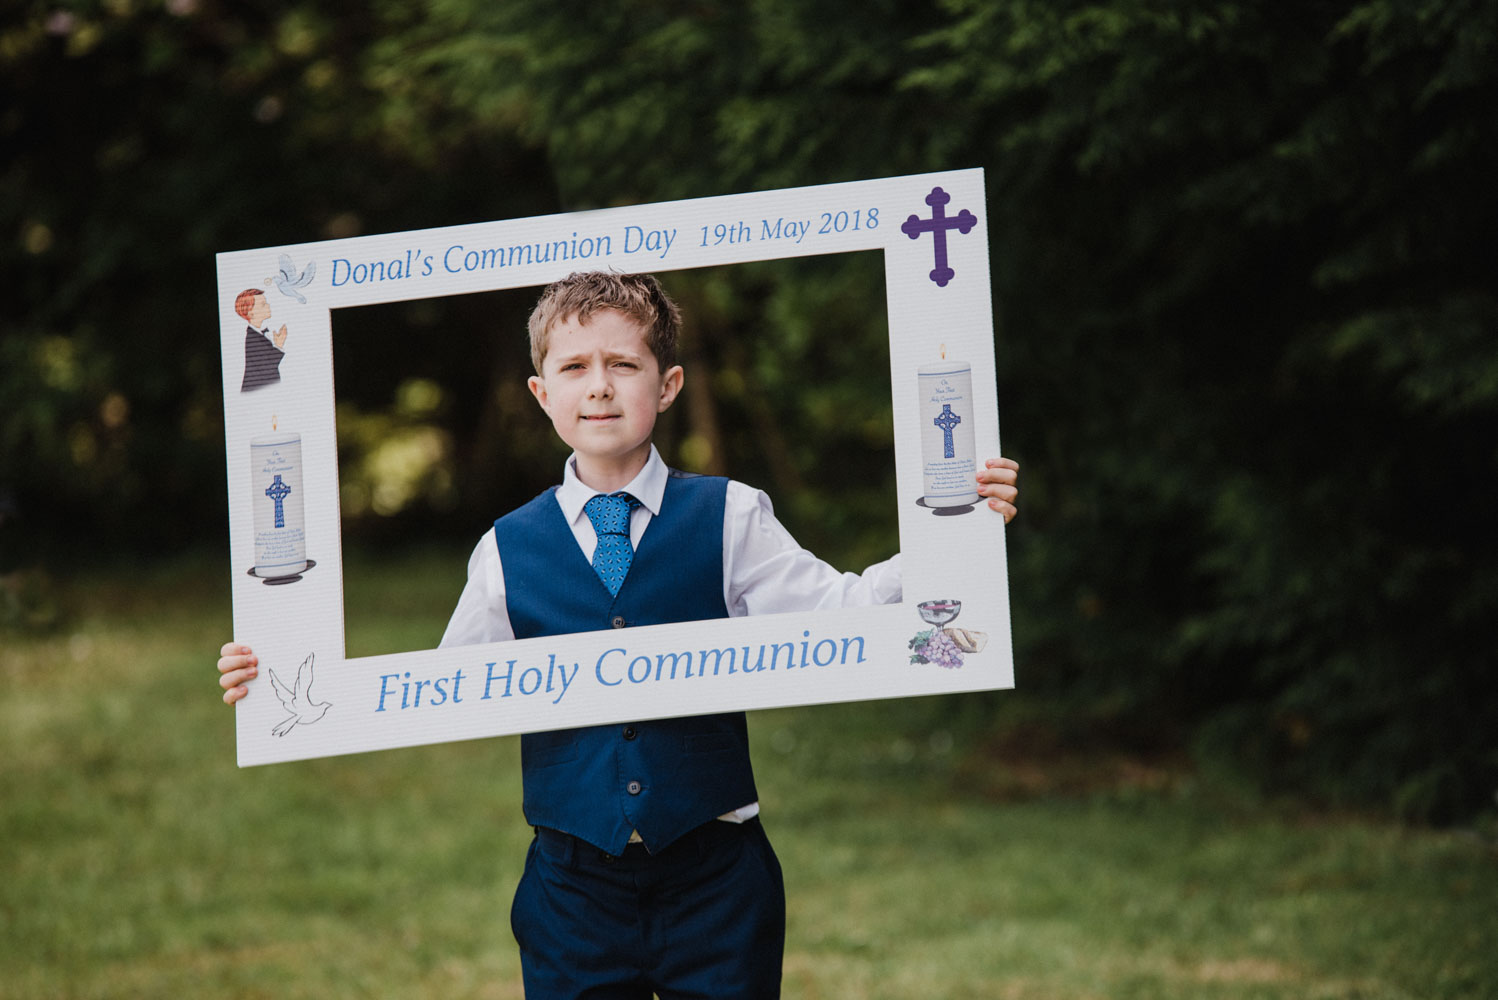 Donal and his Communion Day 19.05.18